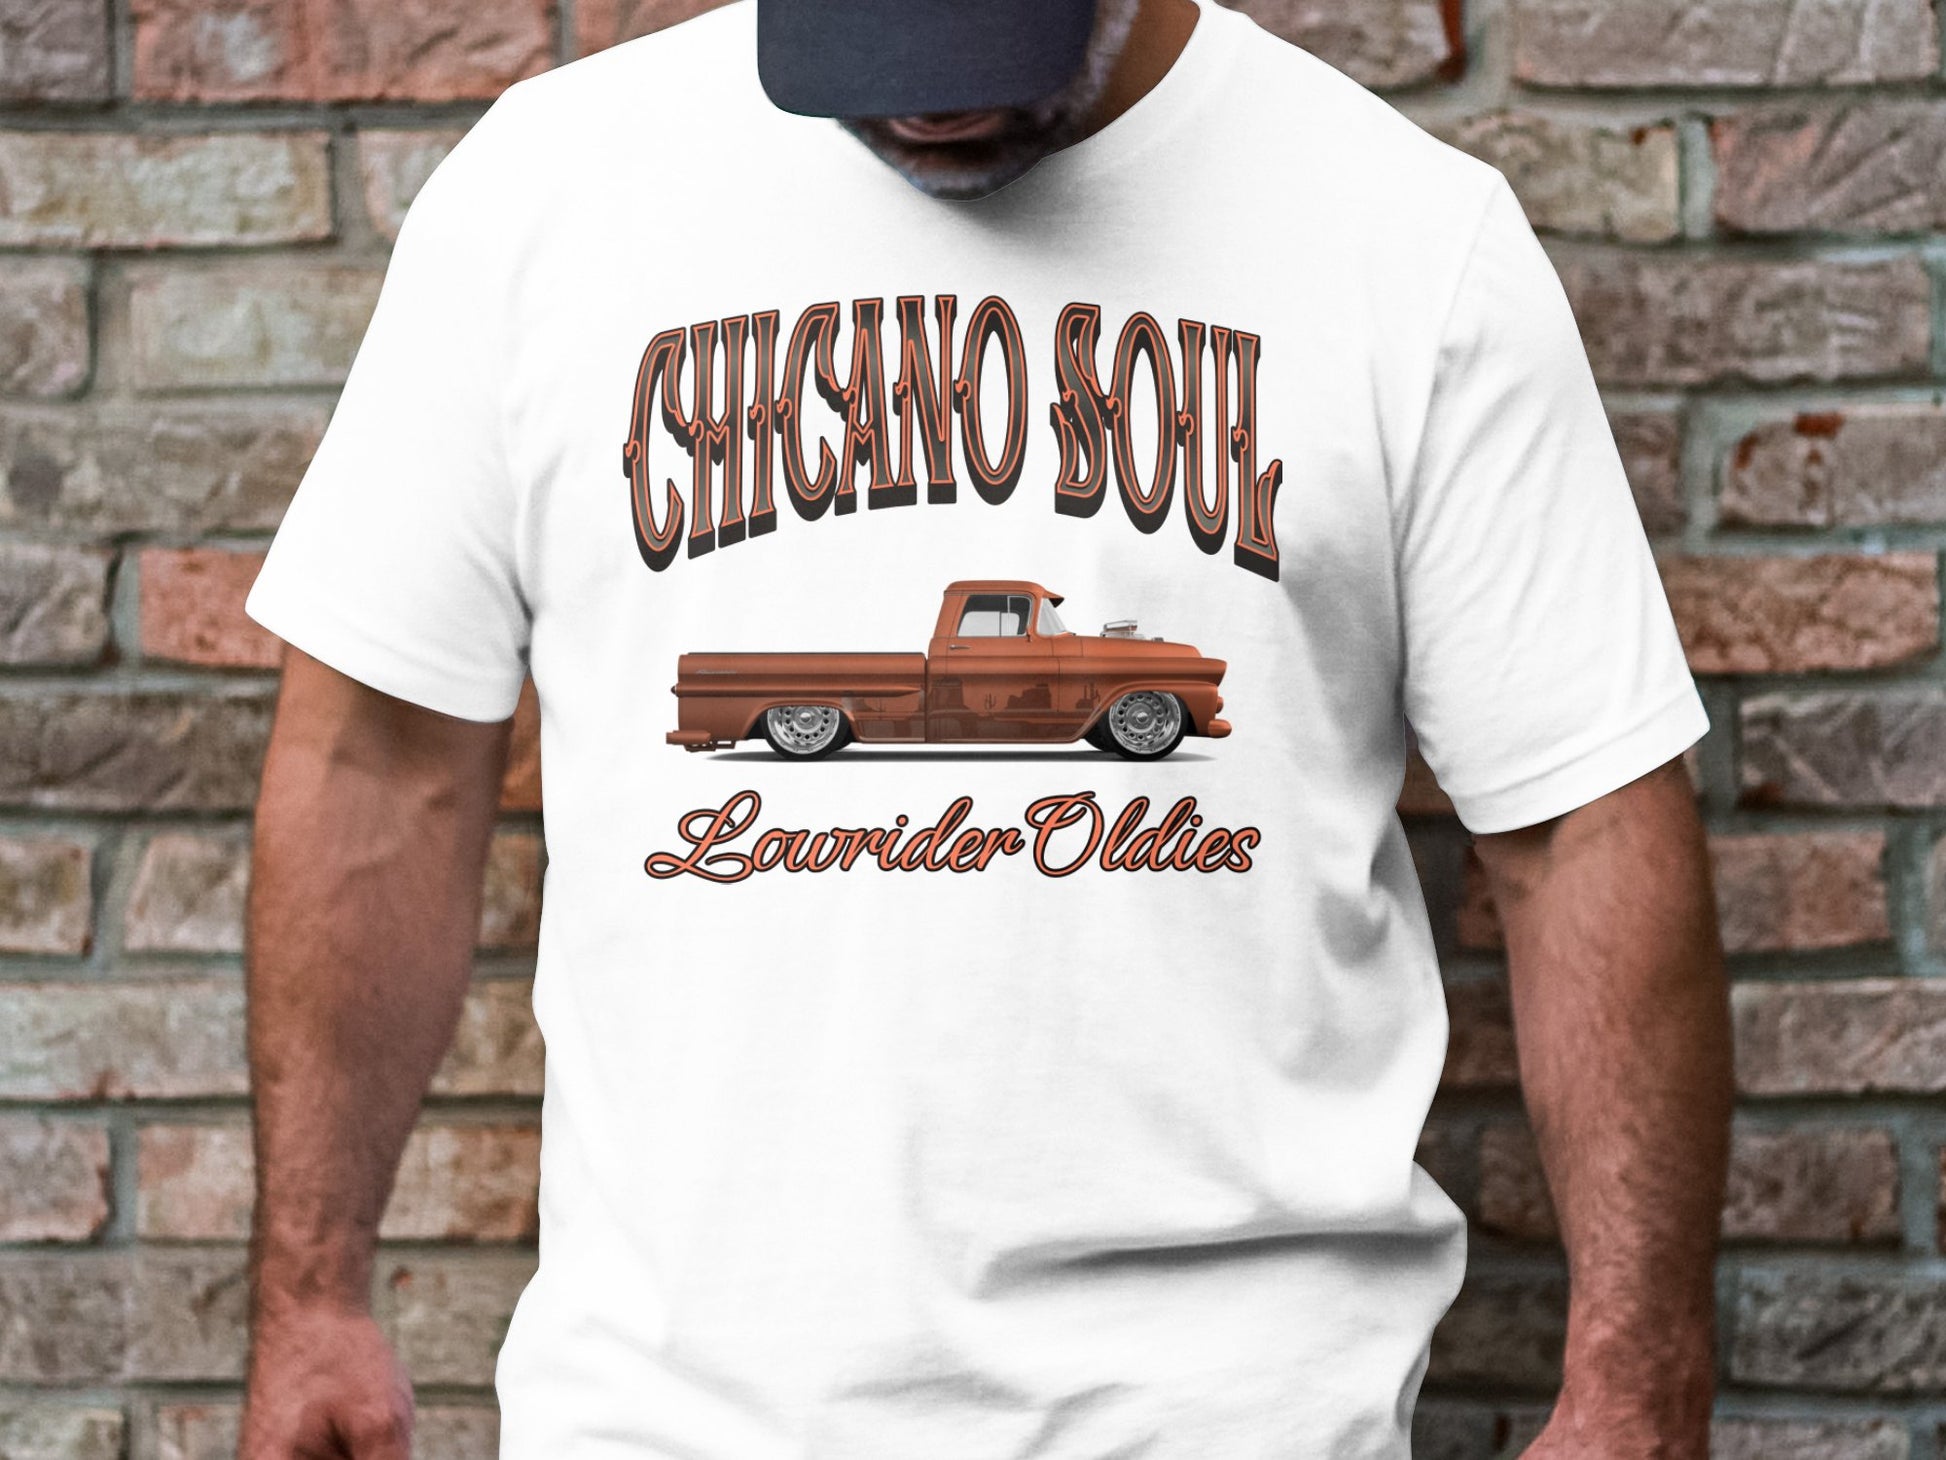 Chicano Soul Lowrider Oldies Vintage Truck Graphic Tee, Classic Car T-Shirt, Retro Style Apparel - Mardonyx XS / White